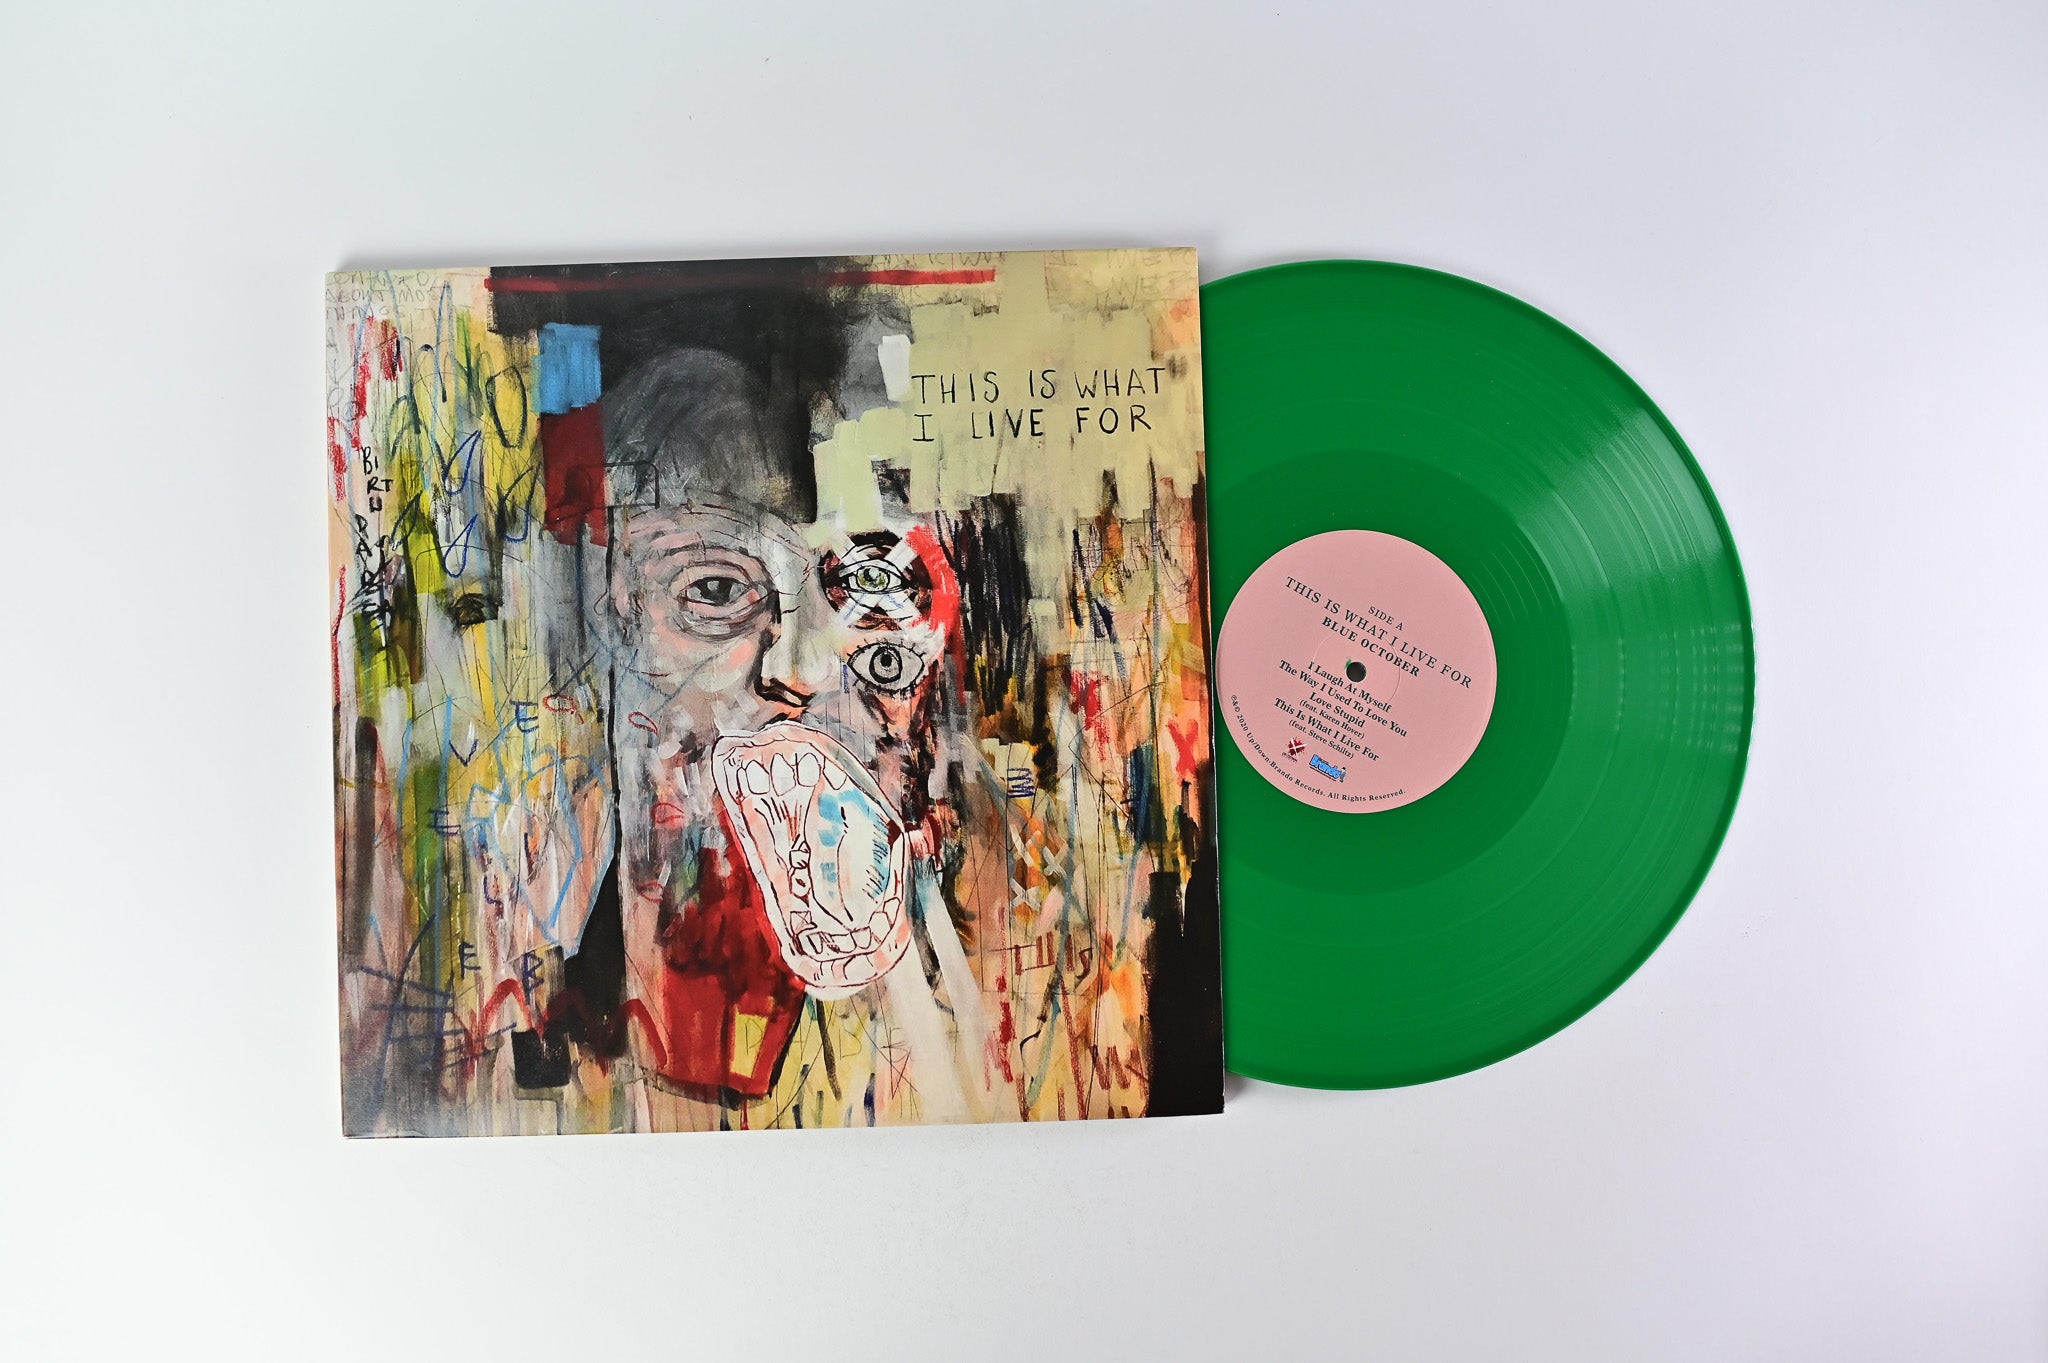 Blue October - This Is What I Live For on Up/Down-Brando Ltd Green Vinyl